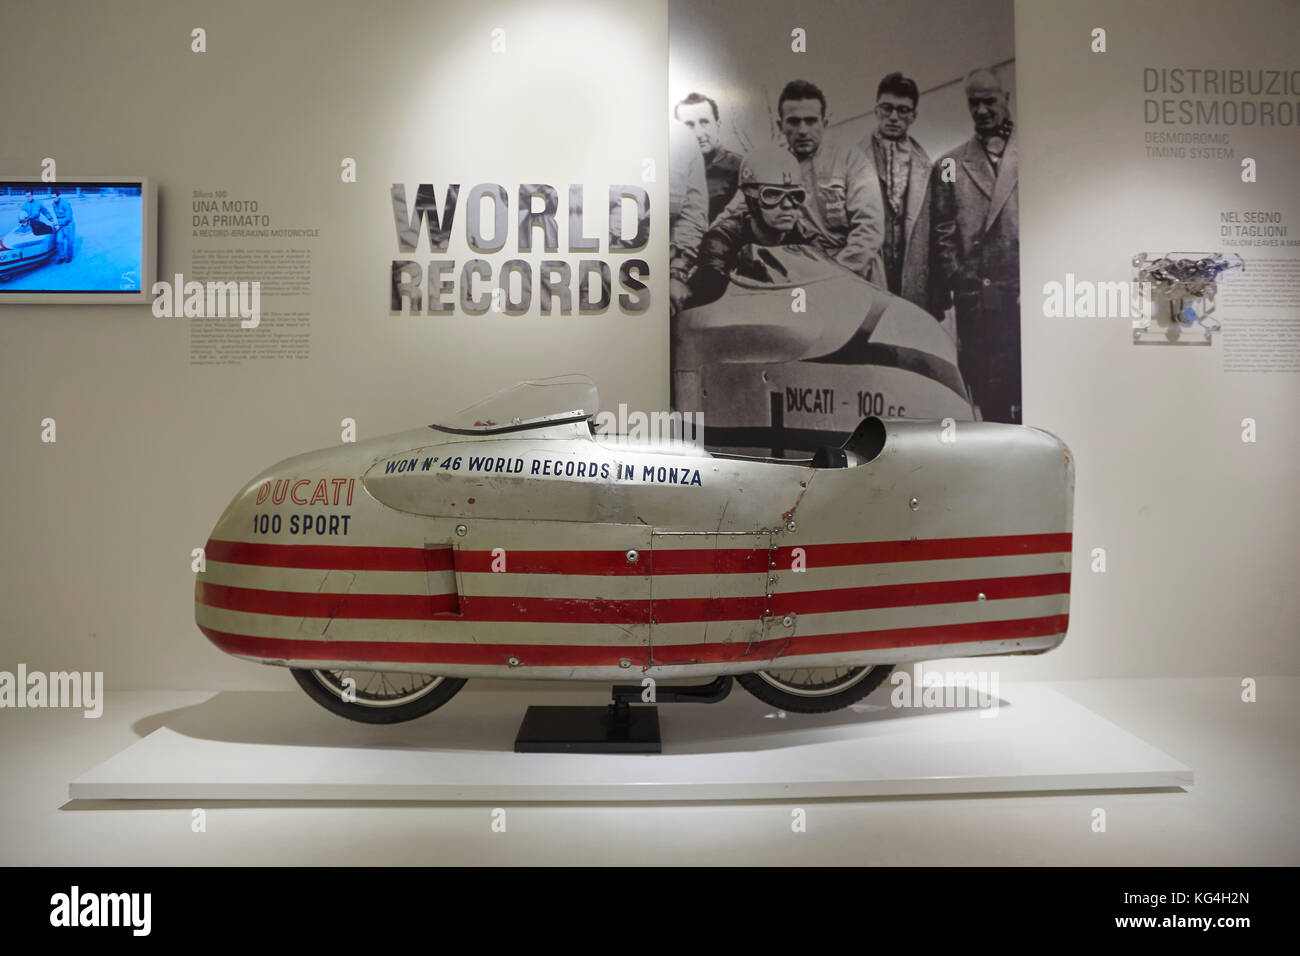 Silura 100 won 46 world speed records in Monza 1956 on display at the Ducati factory museum, Bologna, Italy. Stock Photo